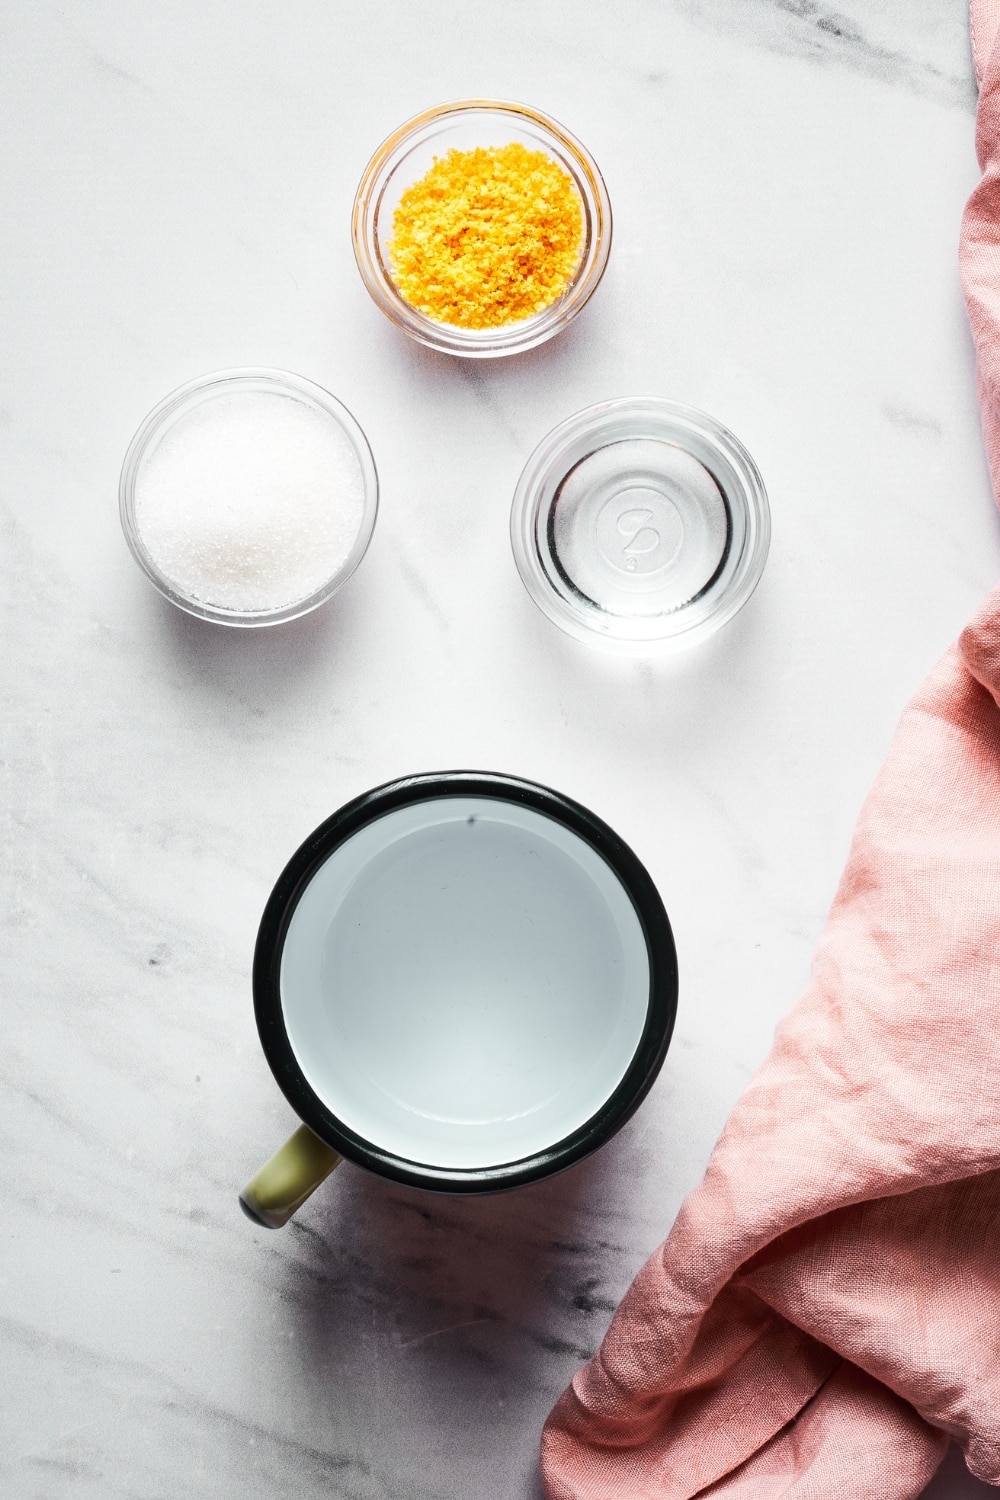 An empty cup, a small bowl of erythritol, a small bowl of water, and a small bowl of orange sauce all on a white counter.